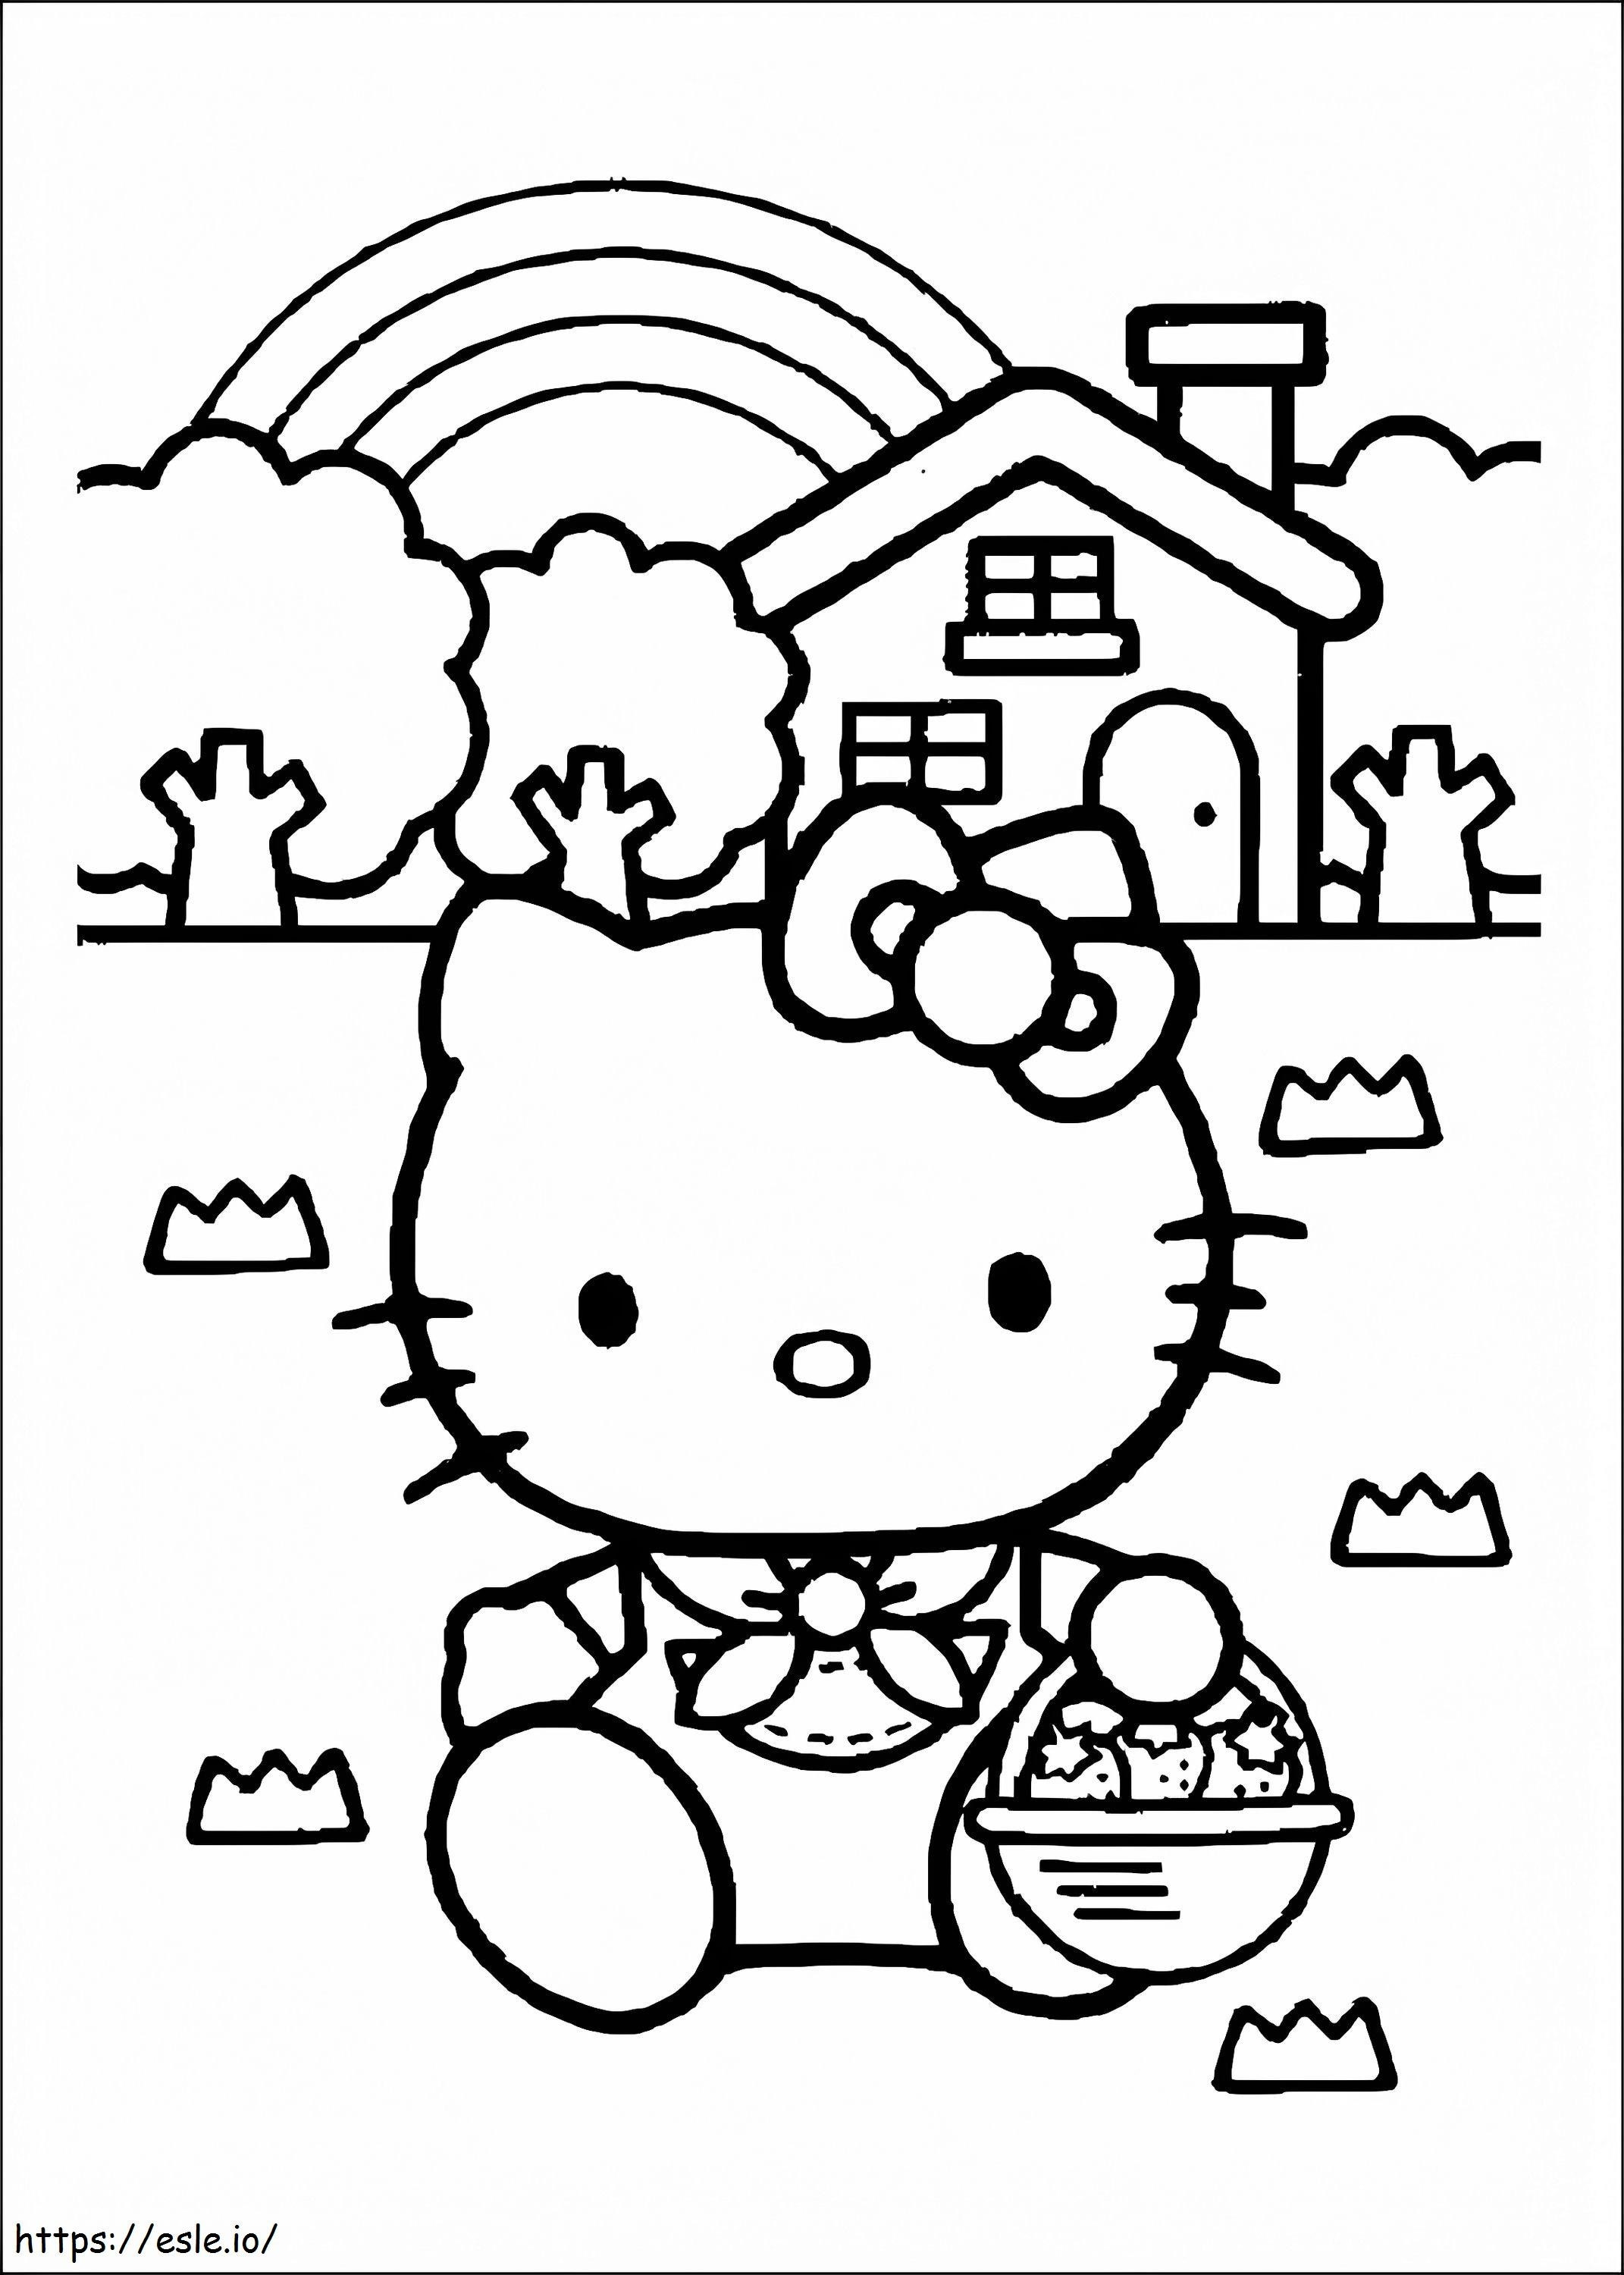 Hello Kitty Holding A Bag Of Fruits coloring page